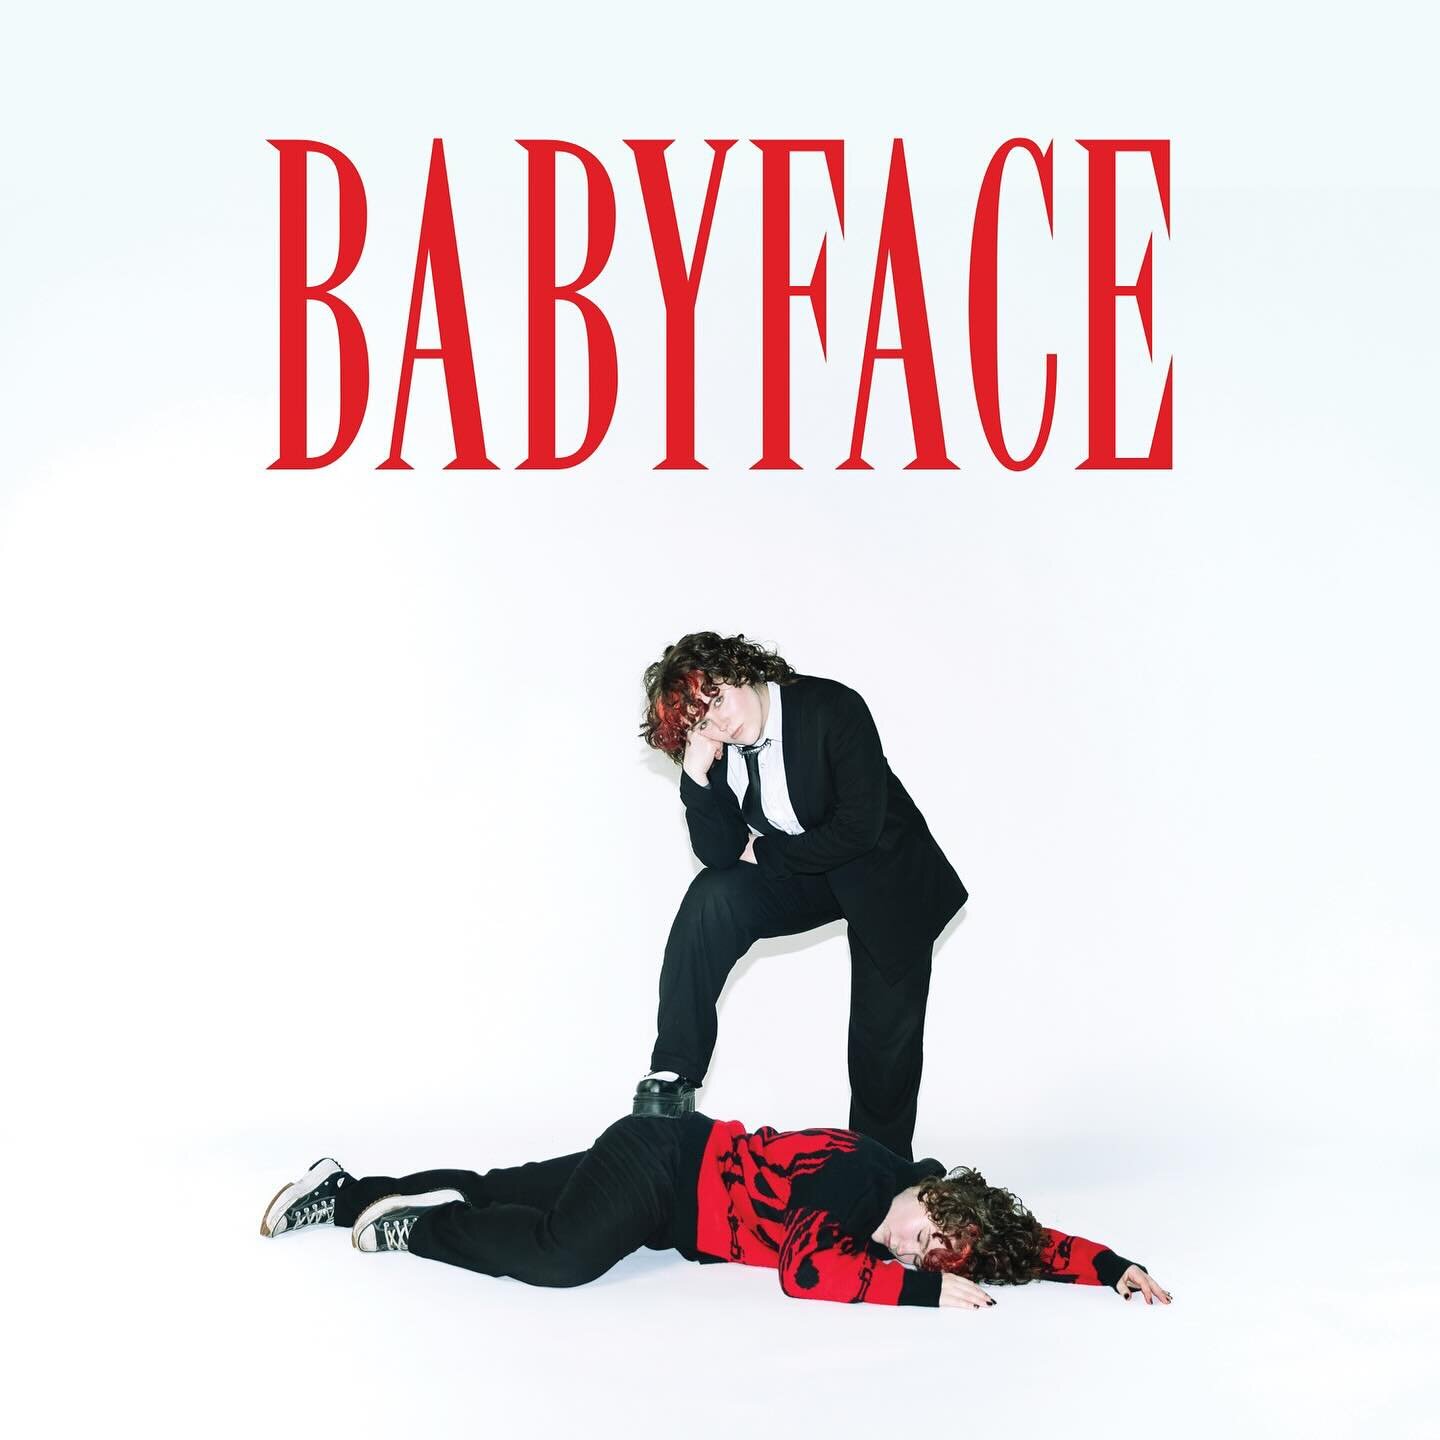 HUGE NEWS! &lsquo;Babyface&rsquo; the debut album from @artiomusic arrives digitally March 1st! ❤️&zwj;🔥

Also now available for pre-order on translucent red vinyl via @fairsound.music 🩸 Head to the link in the band&rsquo;s bio to pre-save and pre-